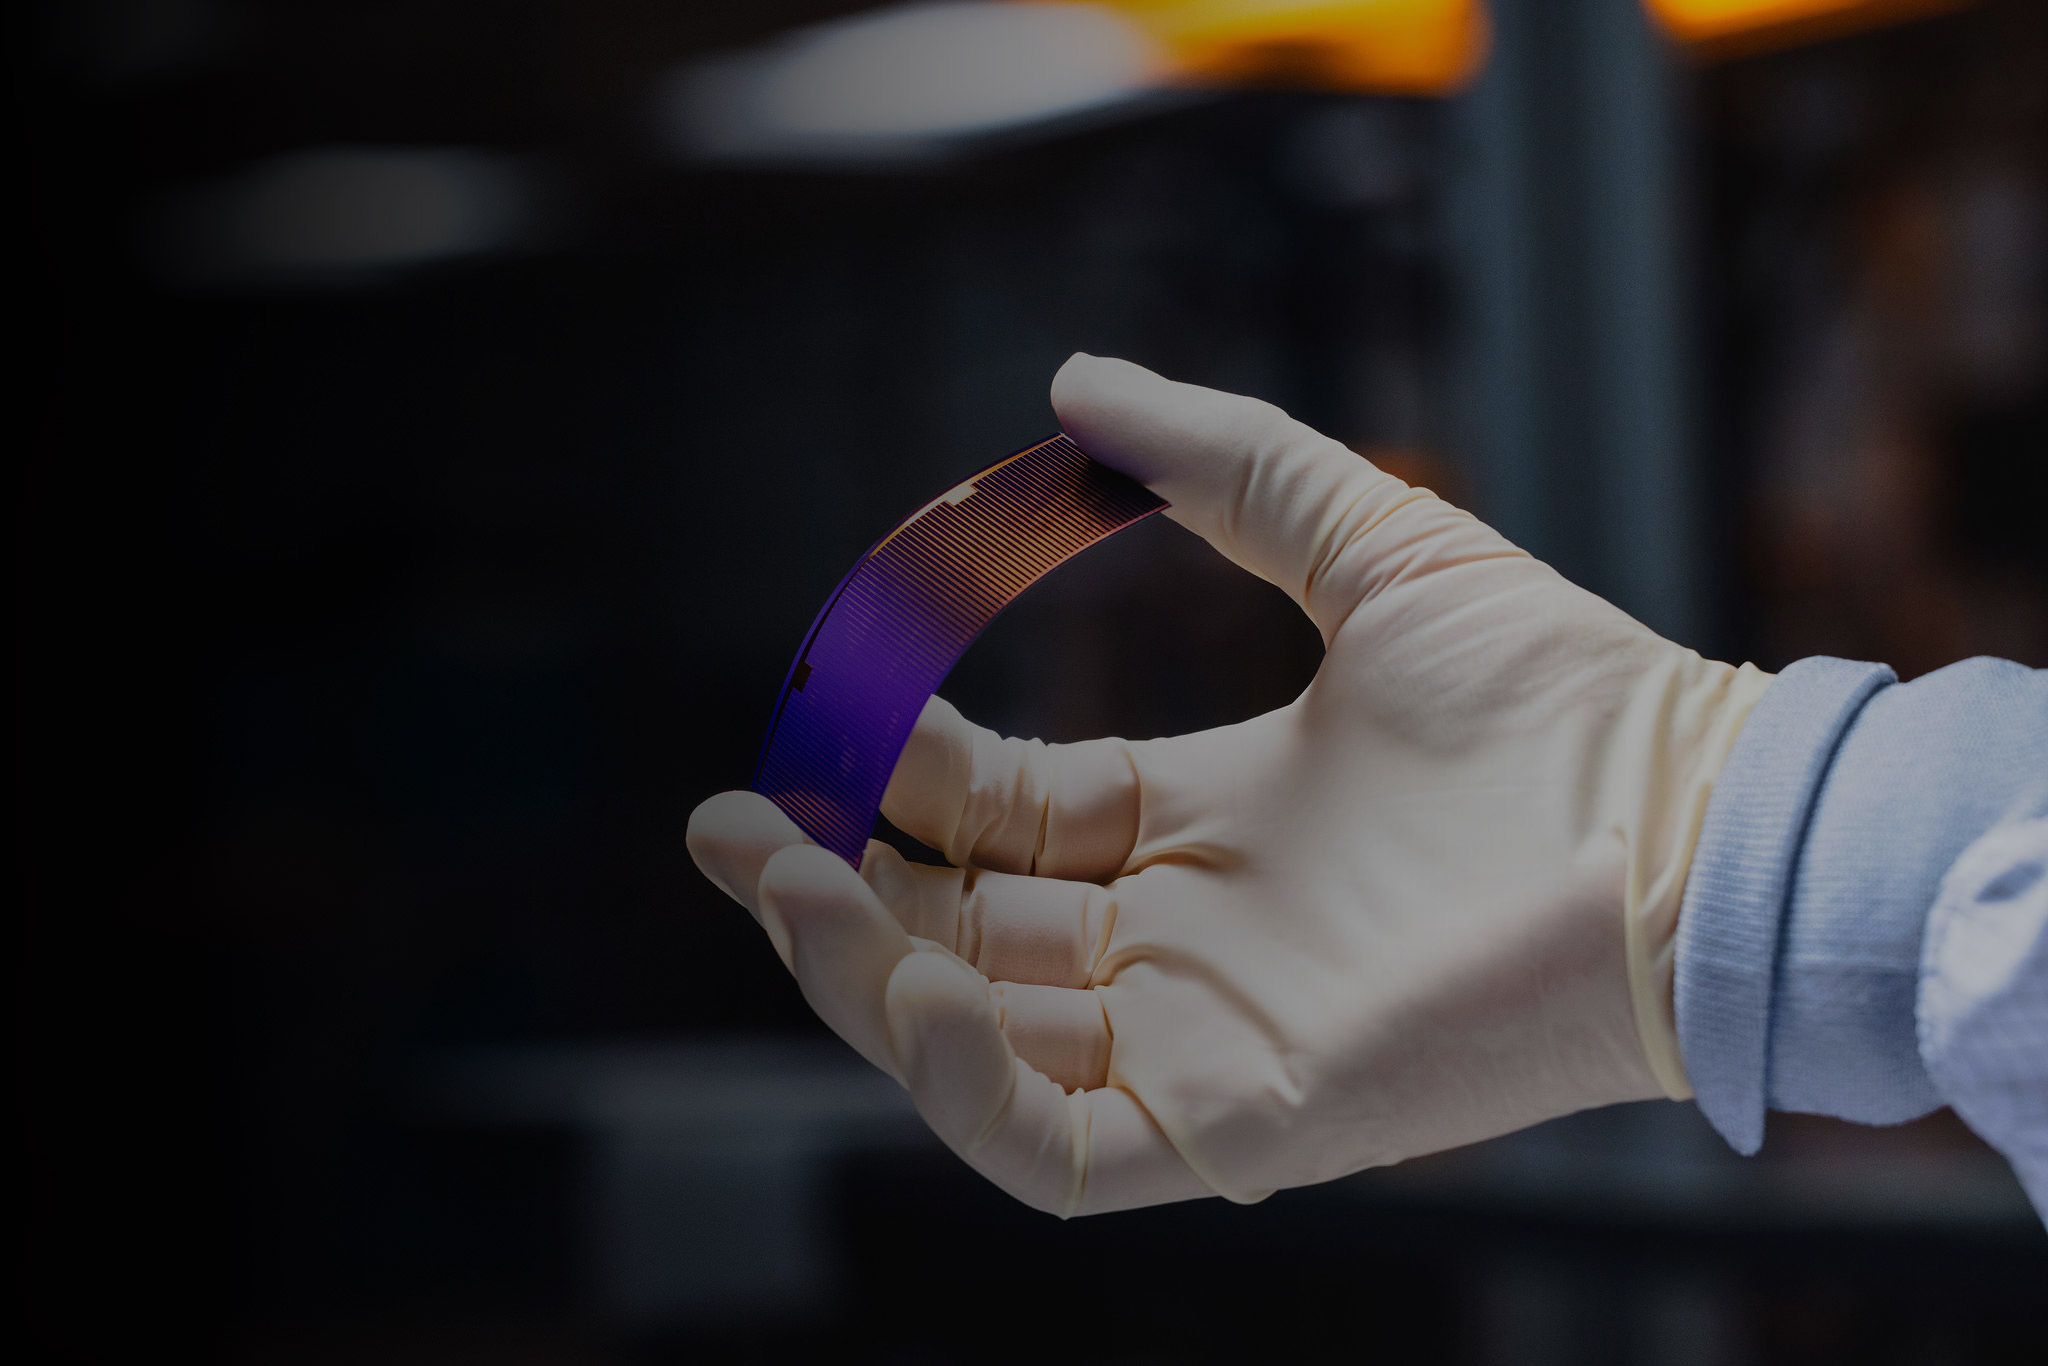 A single solar cell, helded by a gloved hand, and flexed to demonstrate it's flexibility.